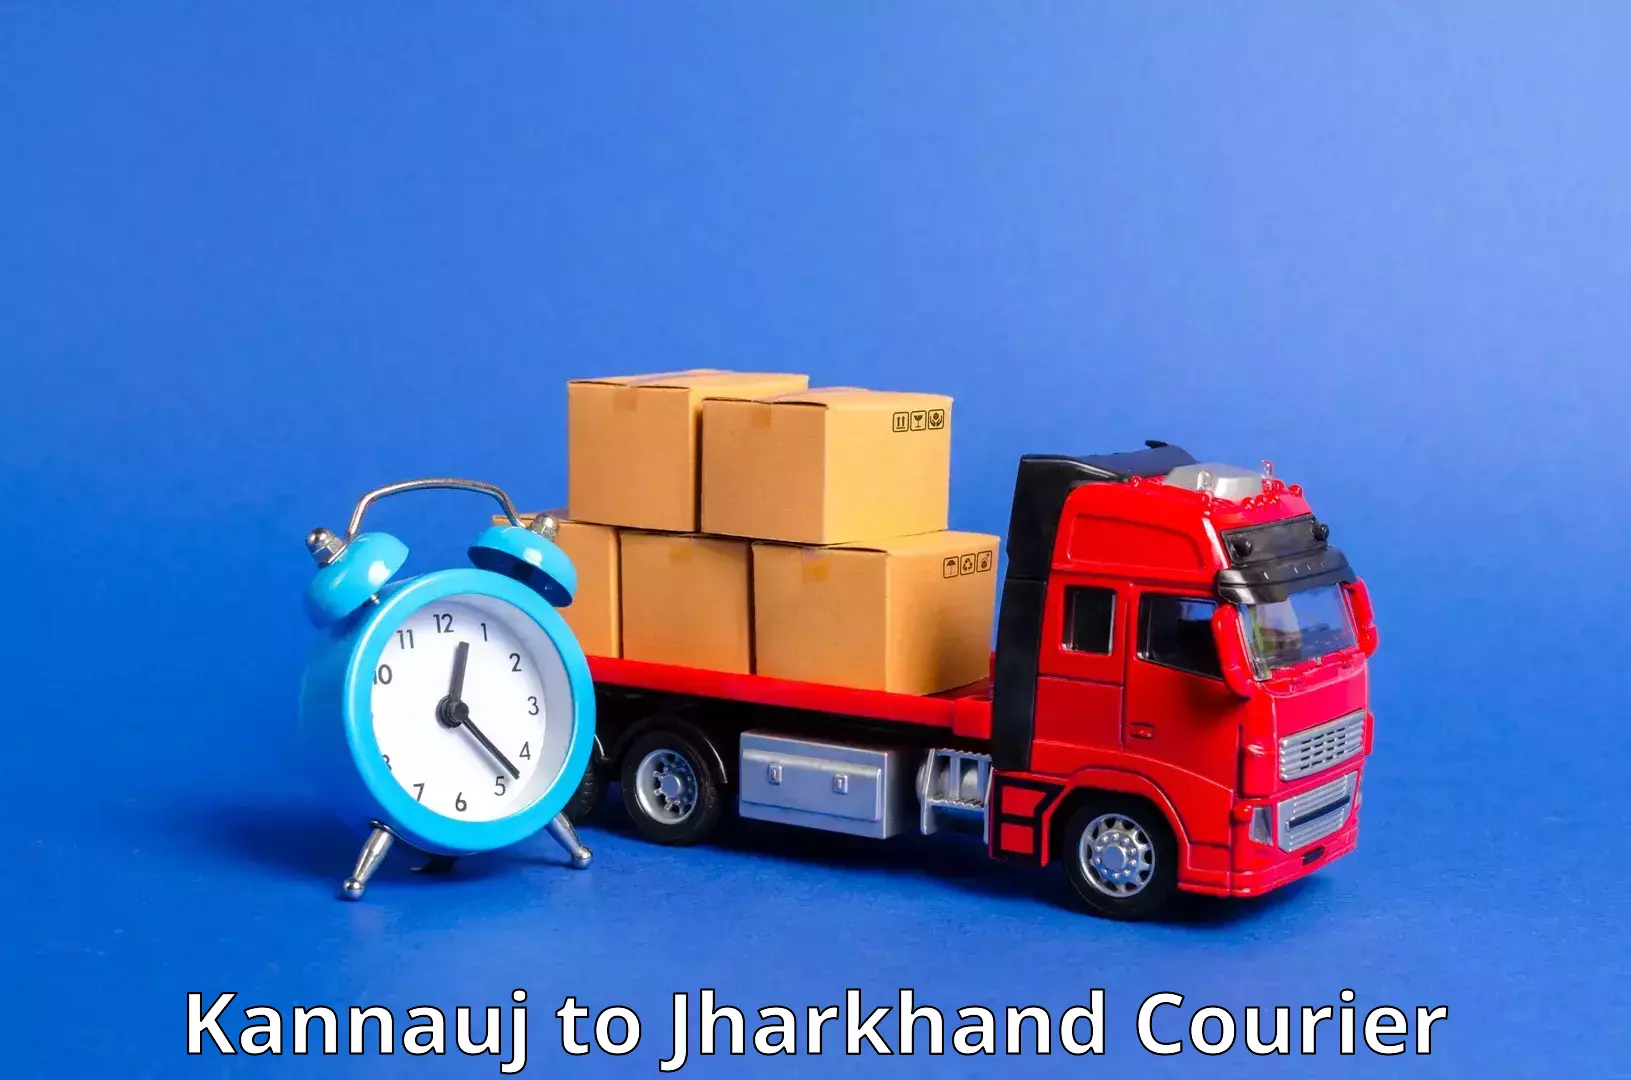 Optimized shipping services in Kannauj to Jamshedpur